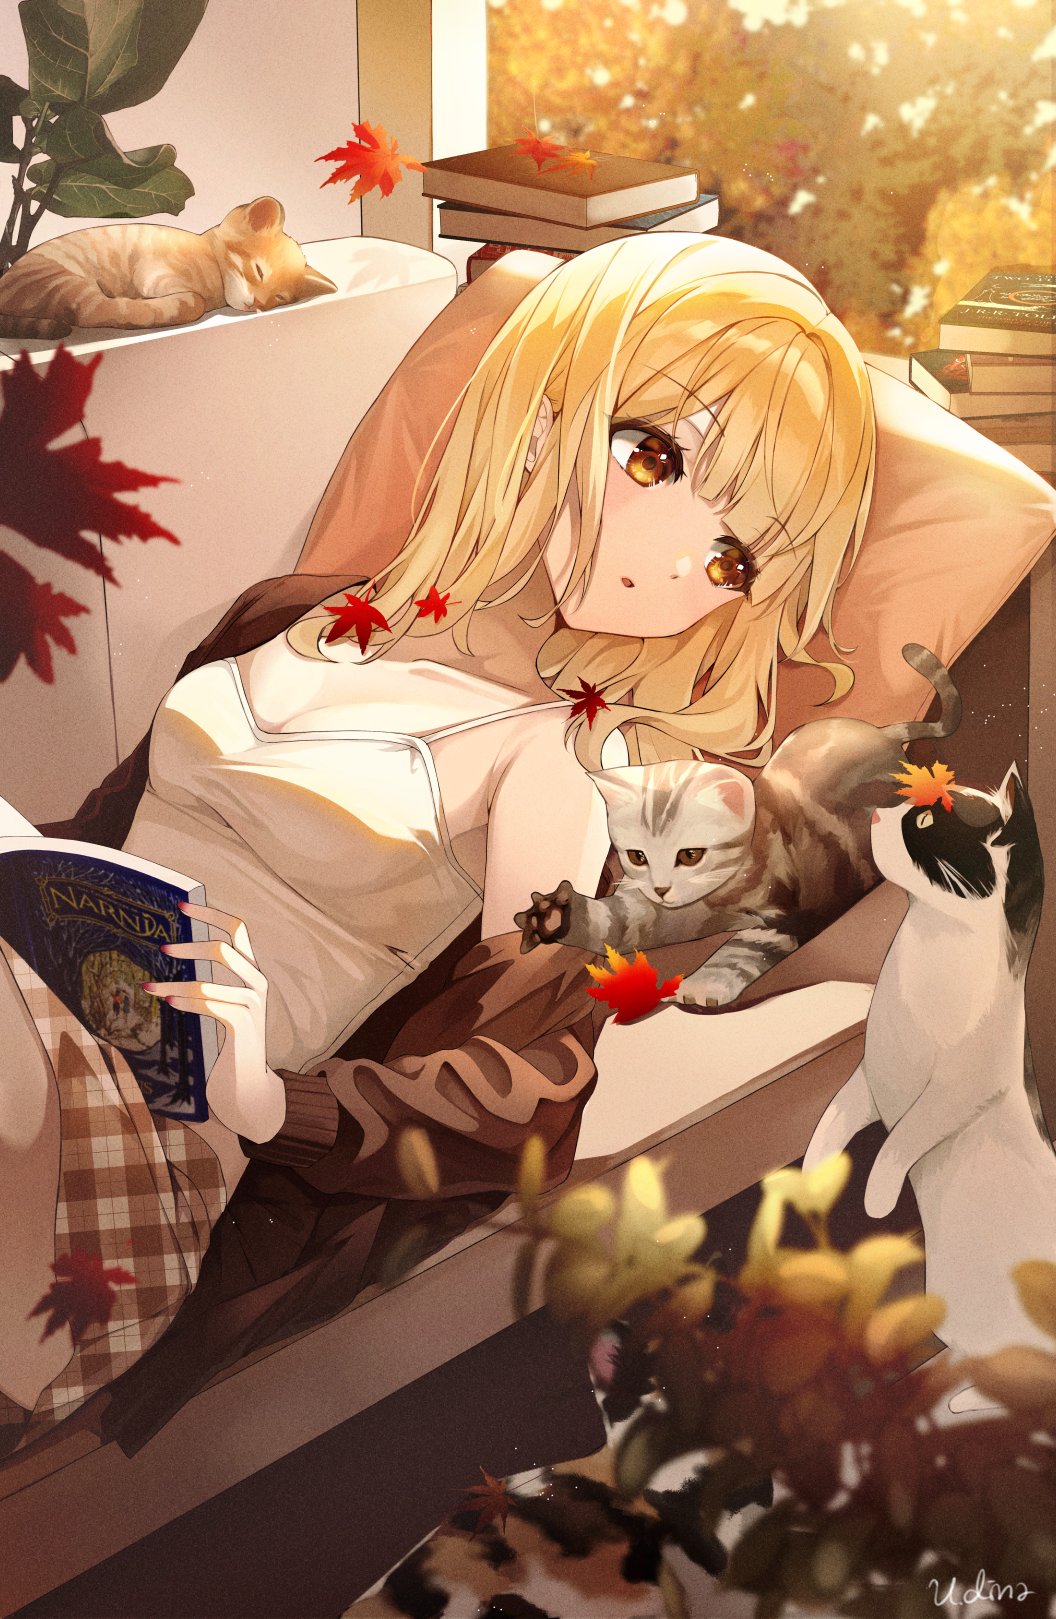 Anime 1056x1619 anime anime girls blonde lying on back lying on couch cleavage looking away open mouth white tops maple leaves short hair cats skirt books reading The Chronicles of Narnia animals leaves